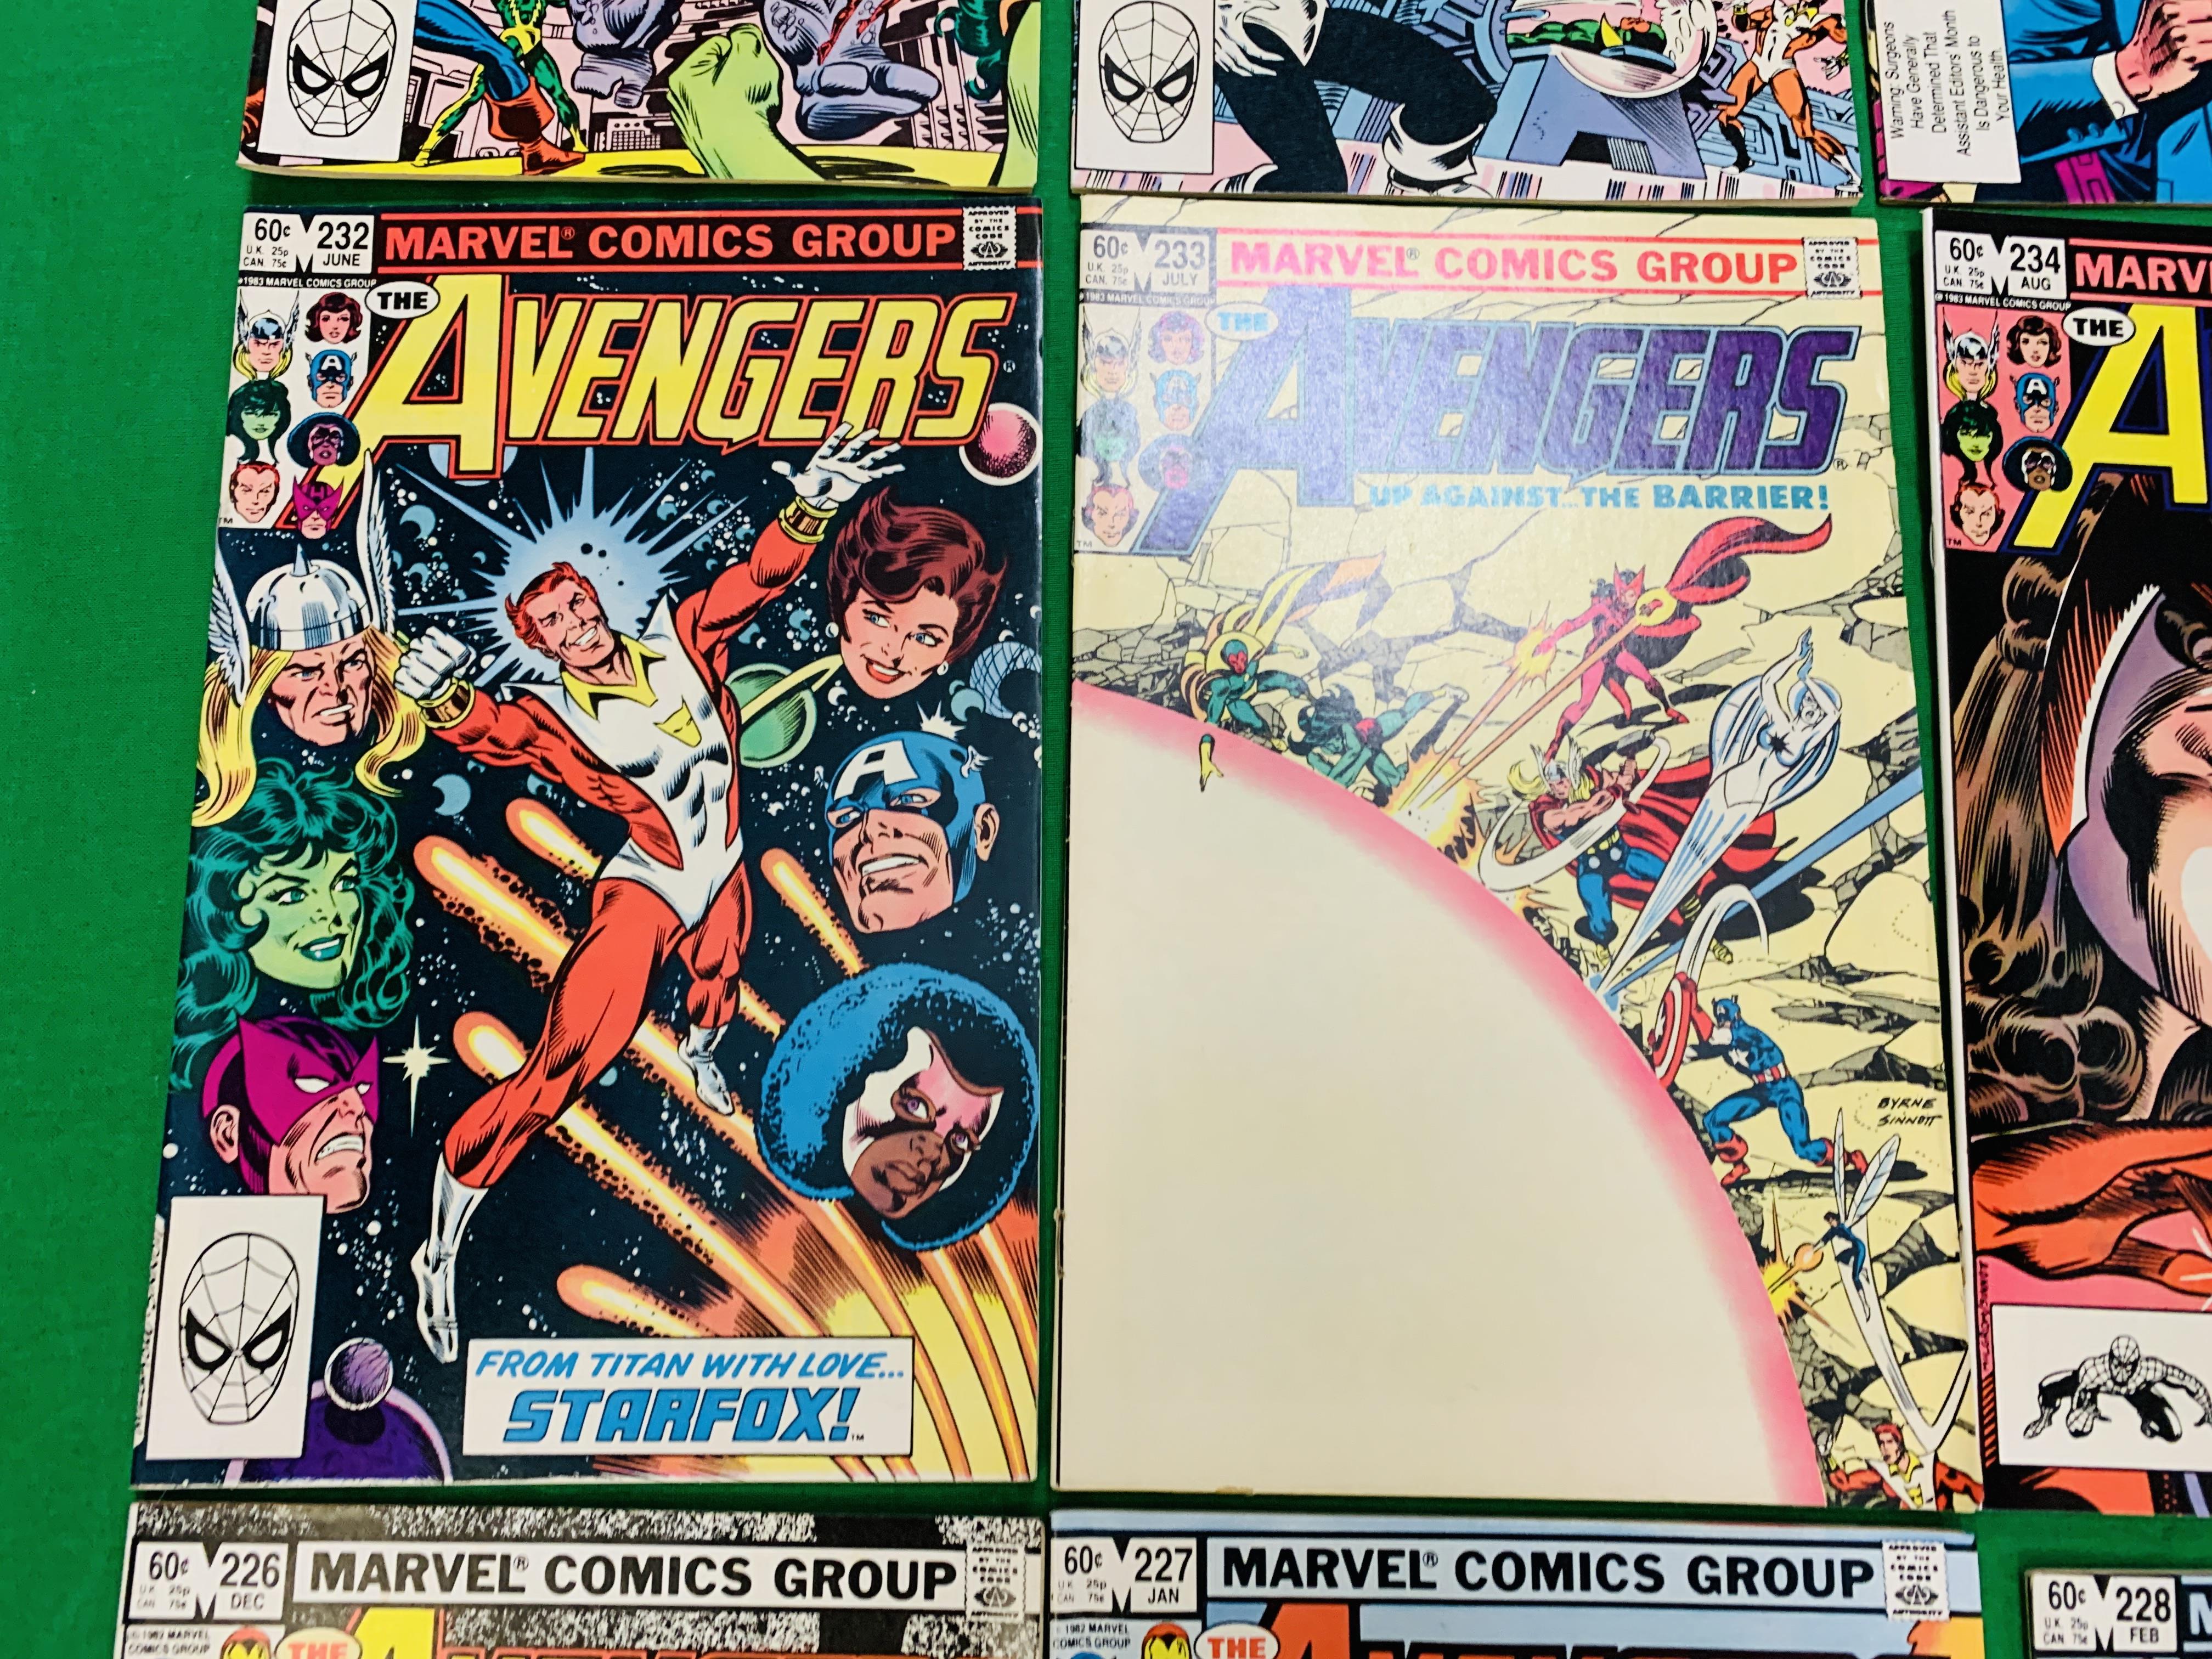 MARVEL COMICS THE AVENGERS NO. 101 - 299, MISSING ISSUES 103 AND 110. - Image 93 of 130